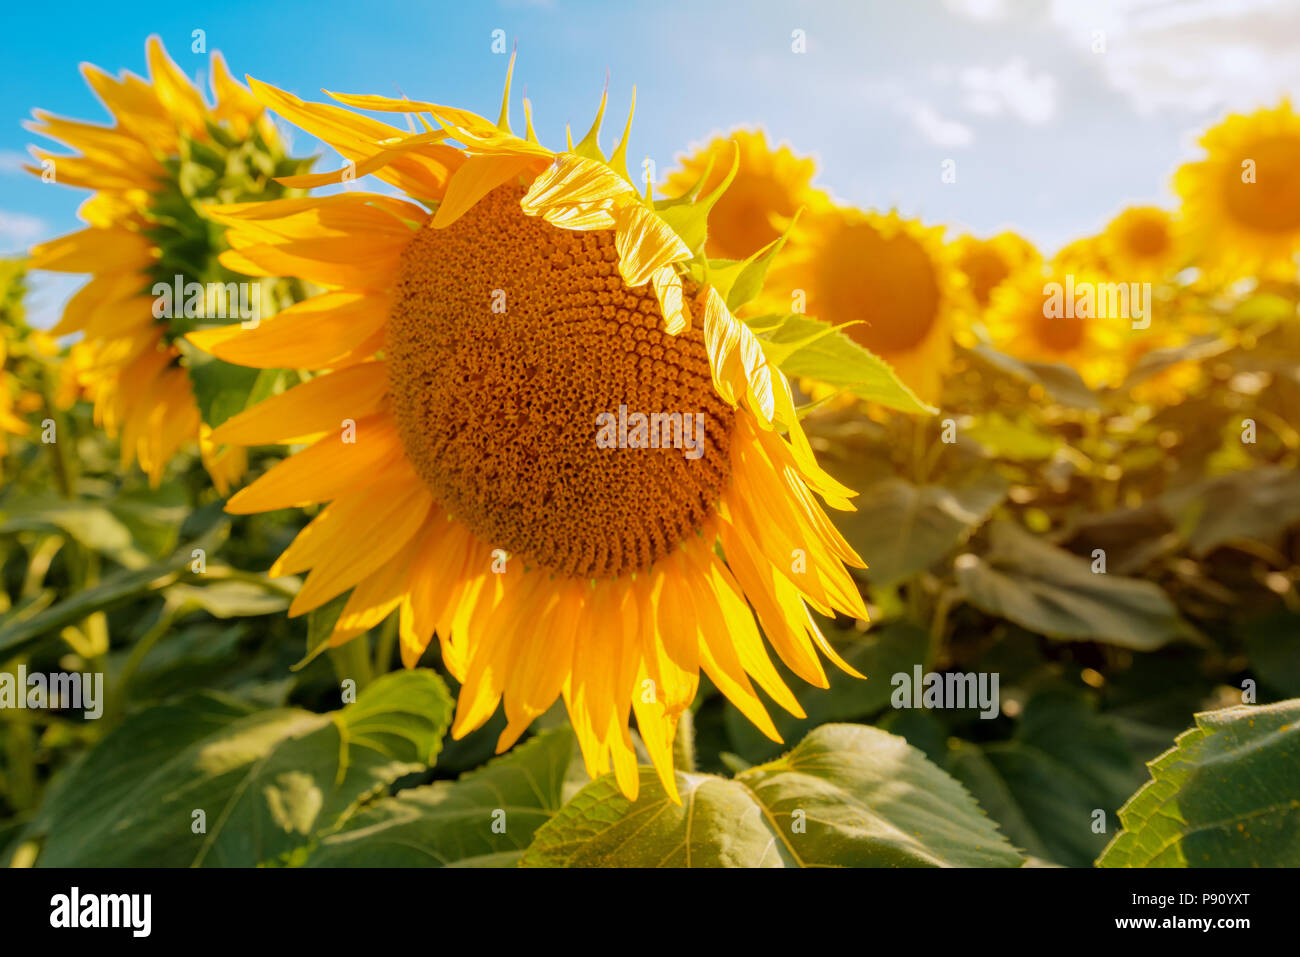 Blooming sunflower crop field on sunny summer day Stock Photo